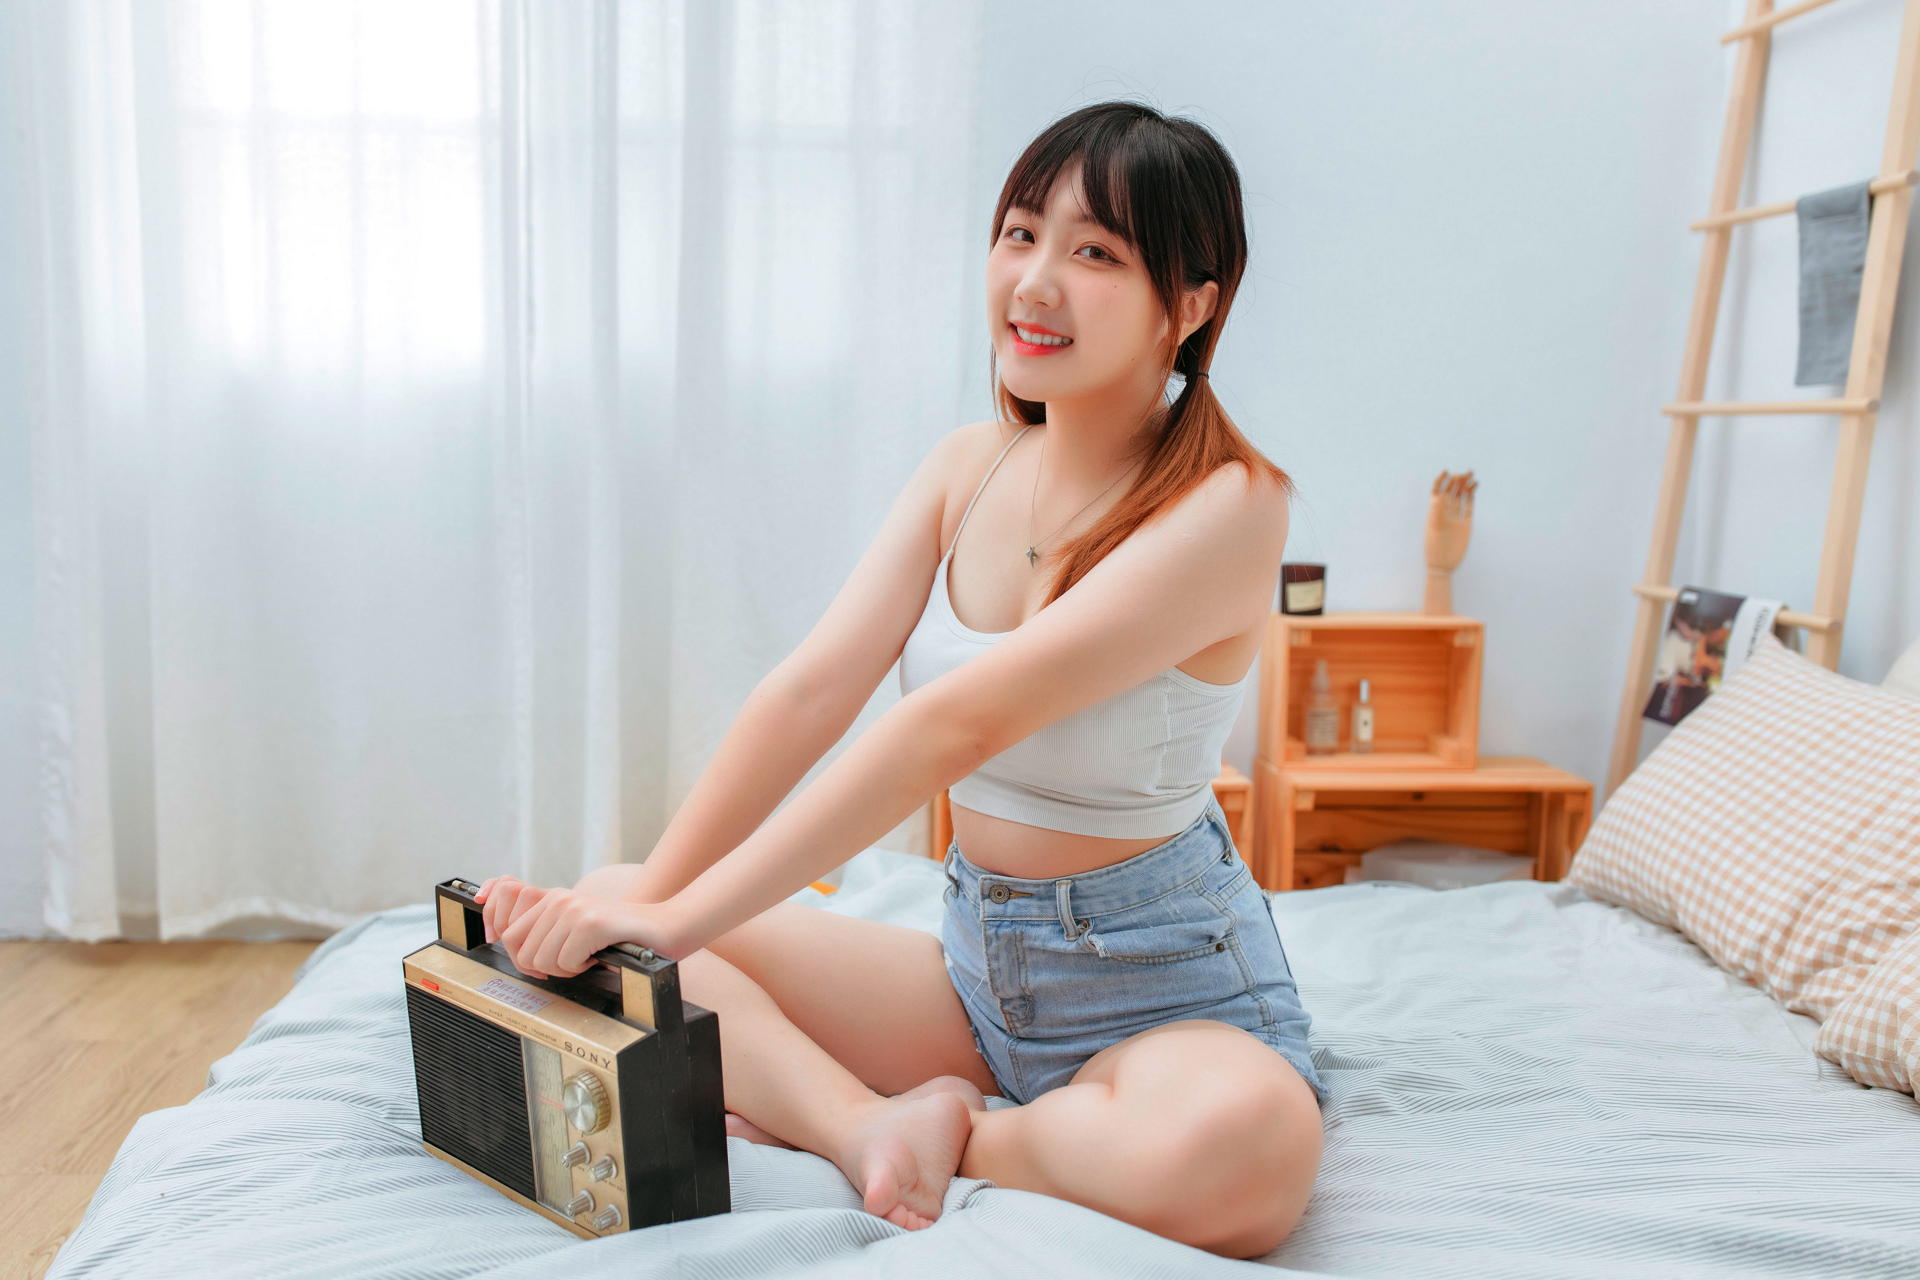 People 1920x1280 Asian model women women indoors dark hair long hair sitting bed necklace curtains crate pillow white tops jean shorts depth of field legs crossed dyed hair twintails radio ladder barefoot